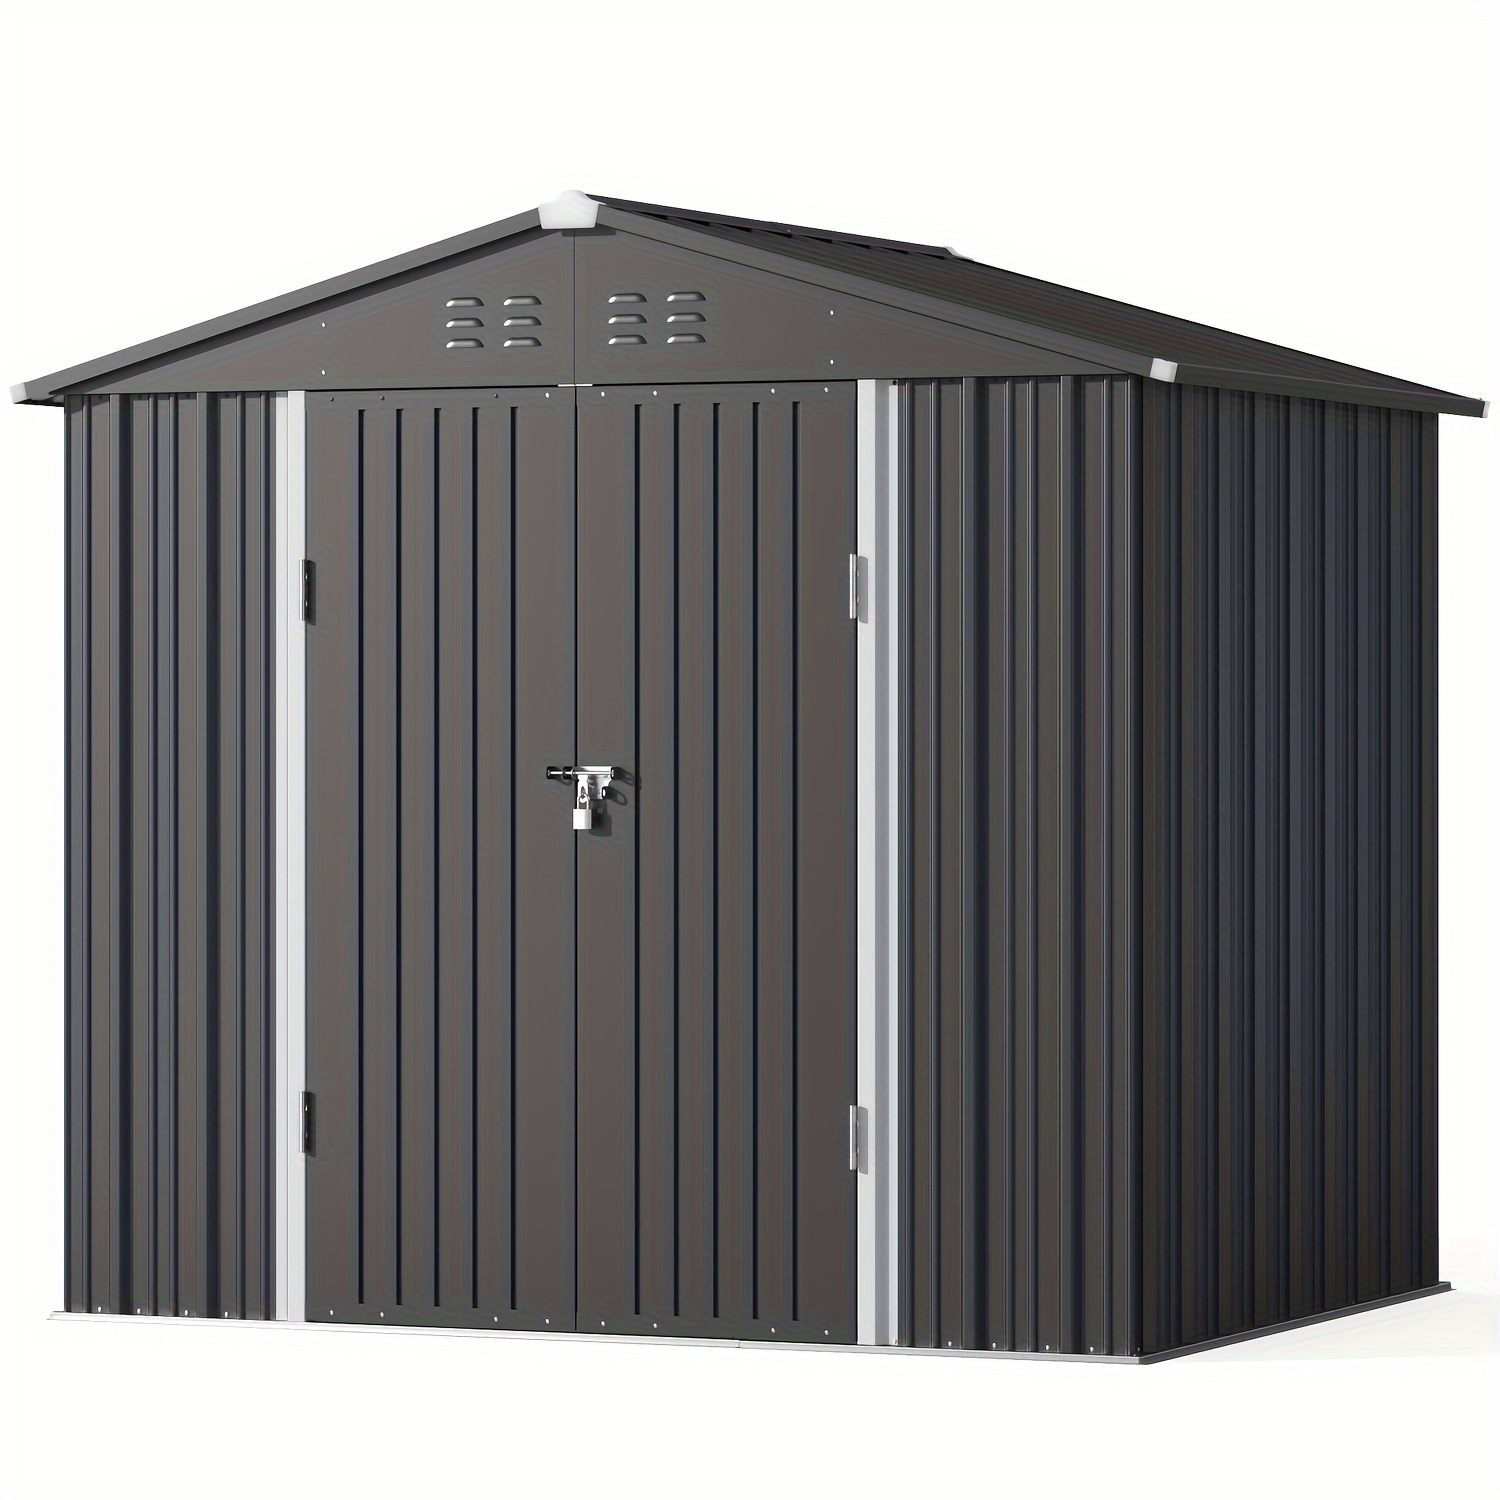 

Outdoor Storage Shed, 8x6 Ft, With Metal Base Frame, Galvanized Metal Garden Shed With Double Lockable Doors, Outdoor Storage Clearance For Backyard Patio, Garden Storage